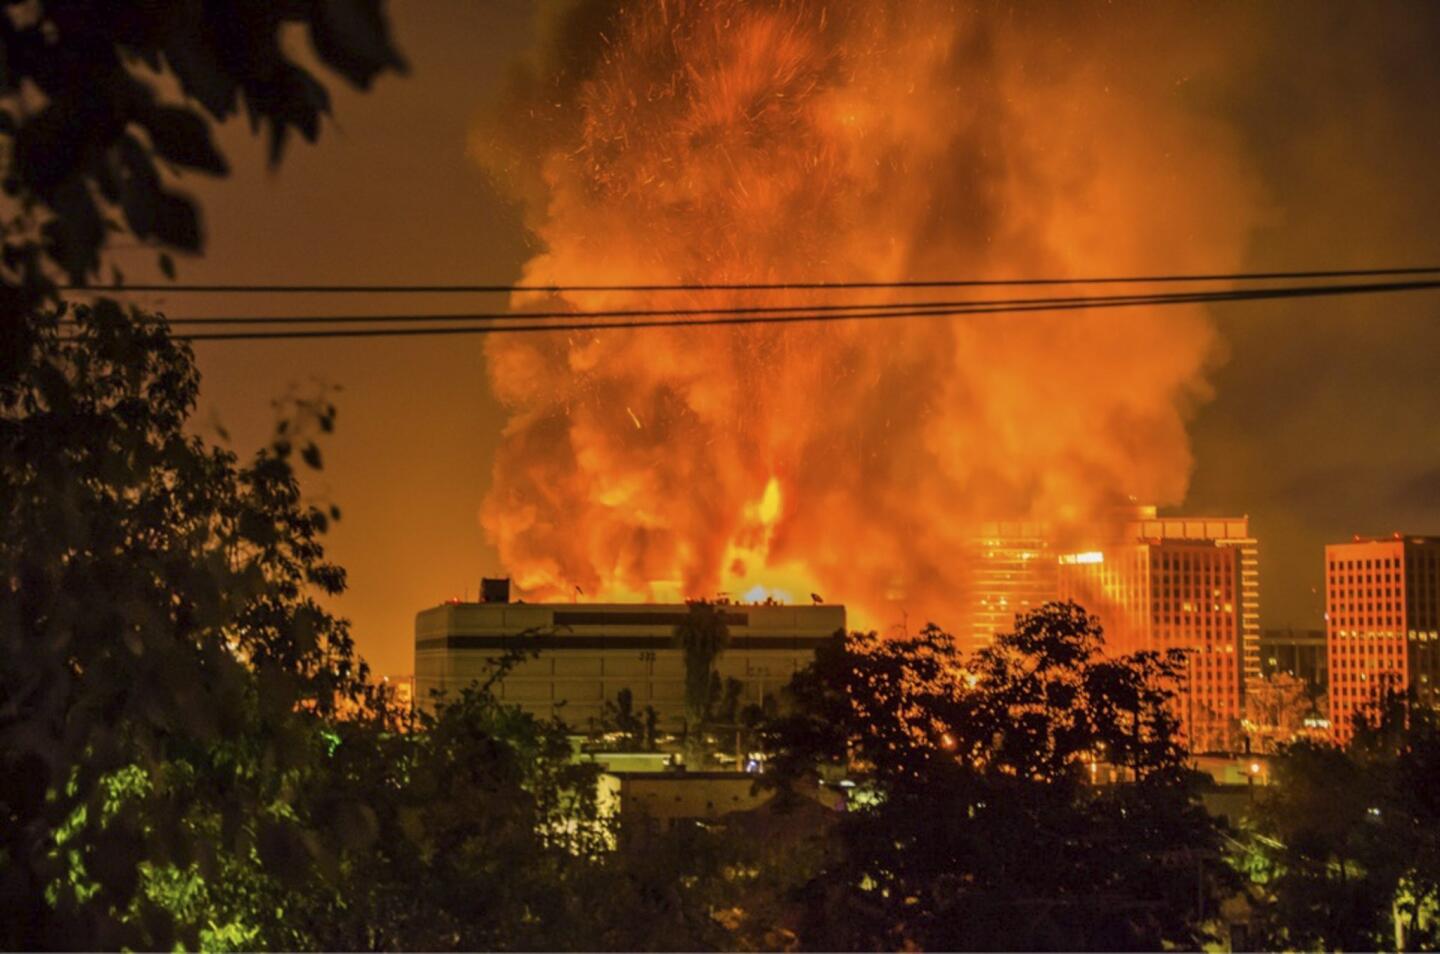 More than 200 firefighters work to control a massive fire as it destroys a seven-story building under construction in downtown Los Angeles.